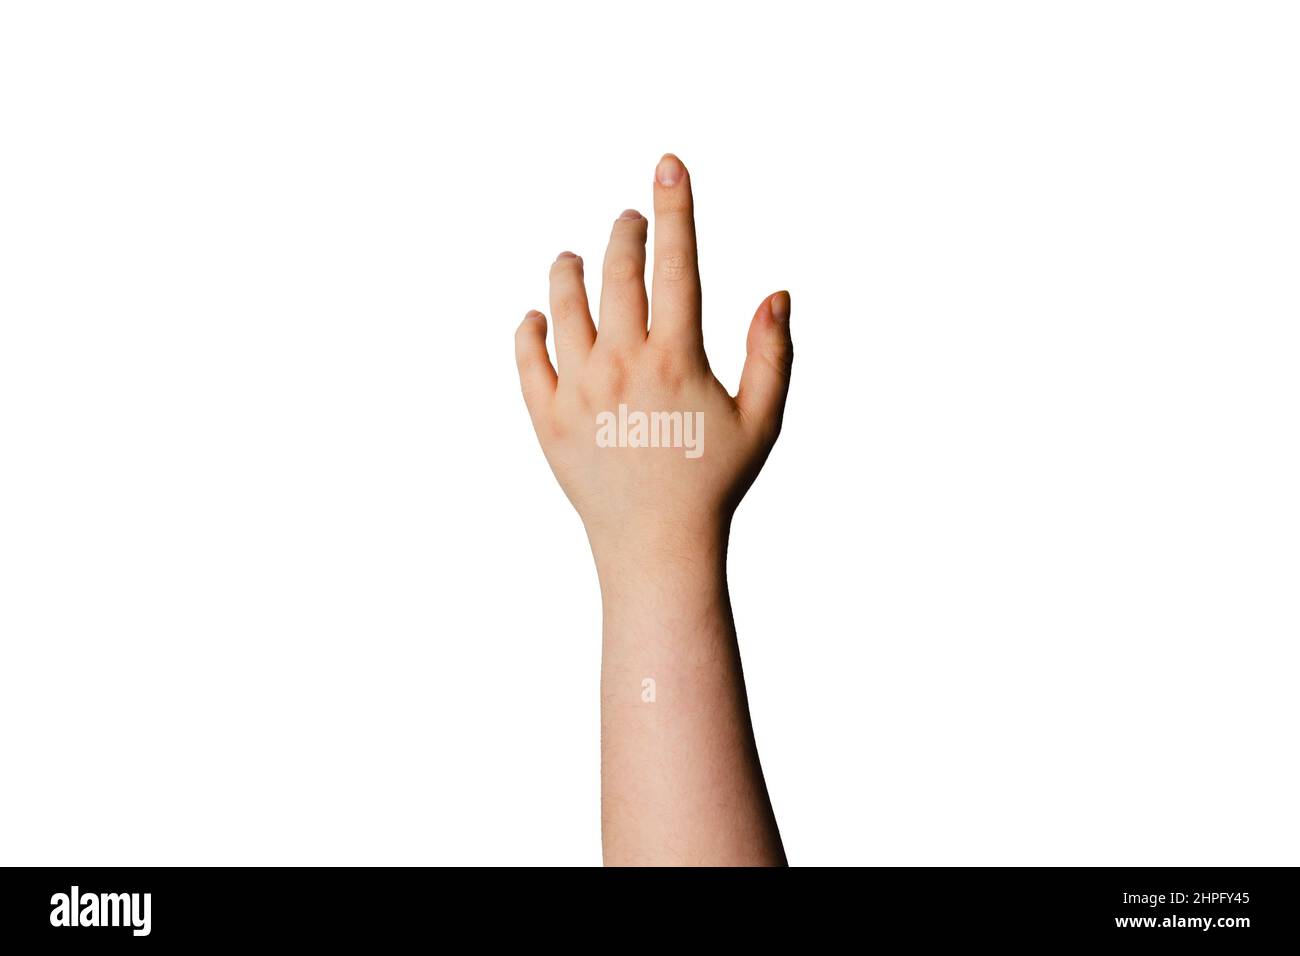 Hand pointing out isolated on white background for cutting out. Stock Photo